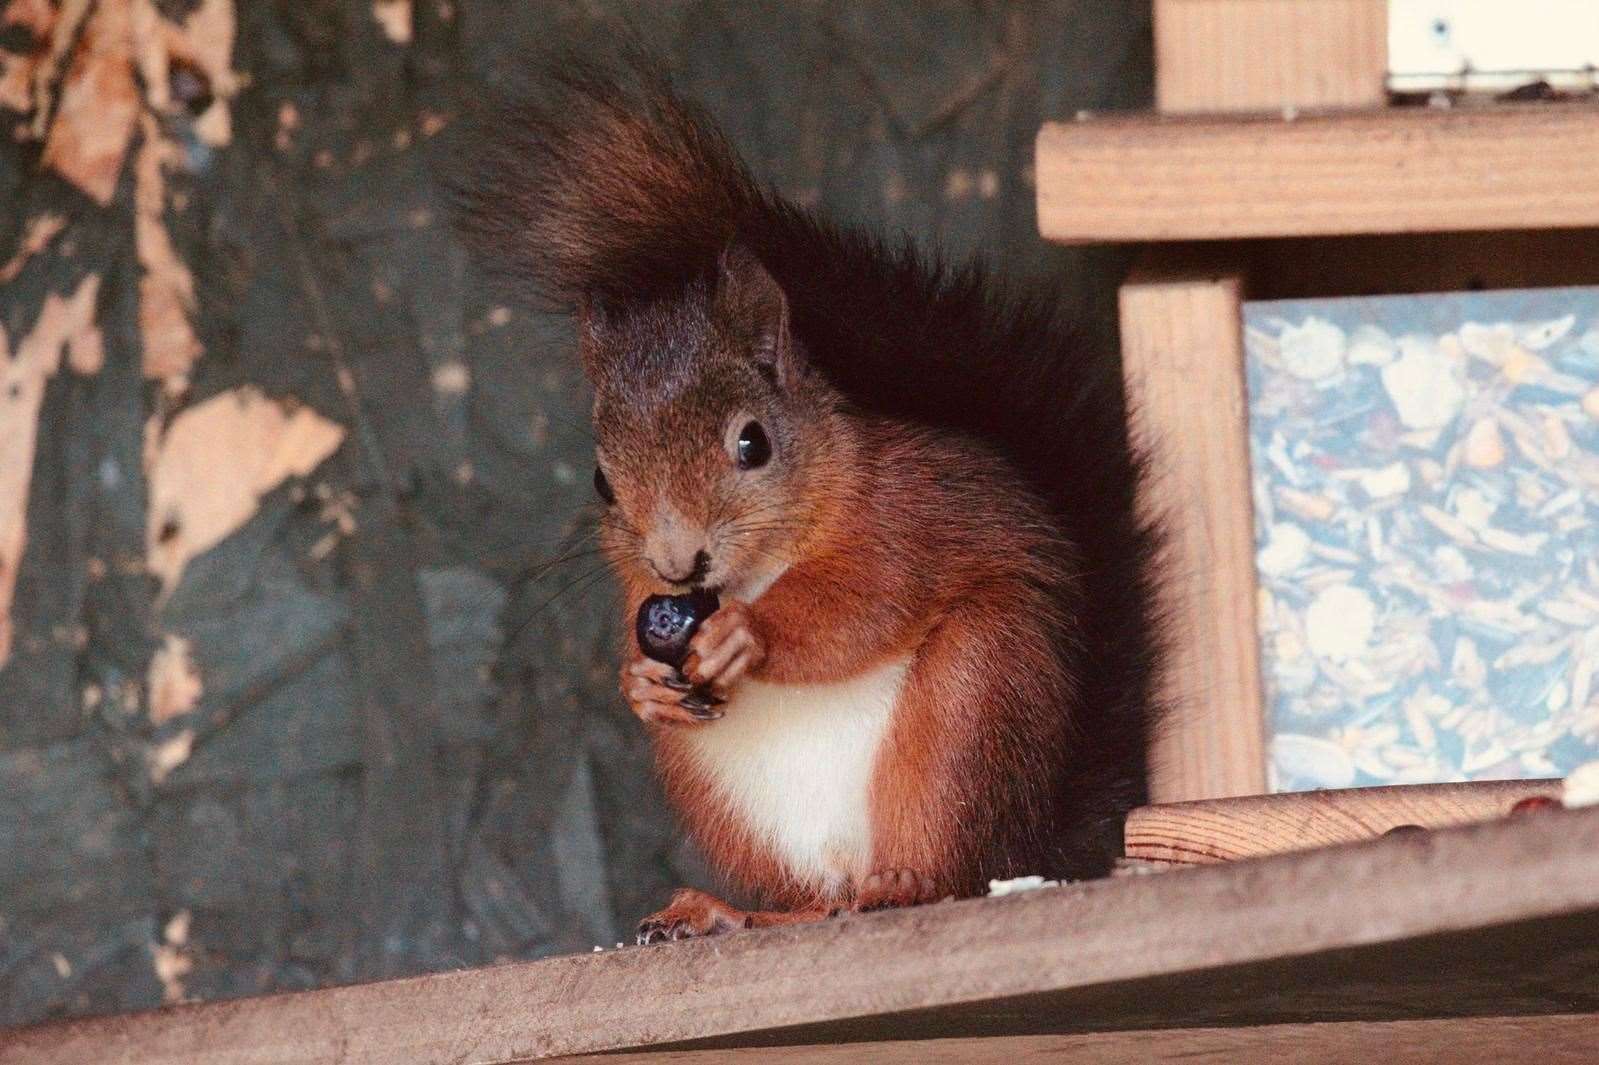 The Scottish SPCA managed to rescue, rehabilitate and release five red squirrel kits.